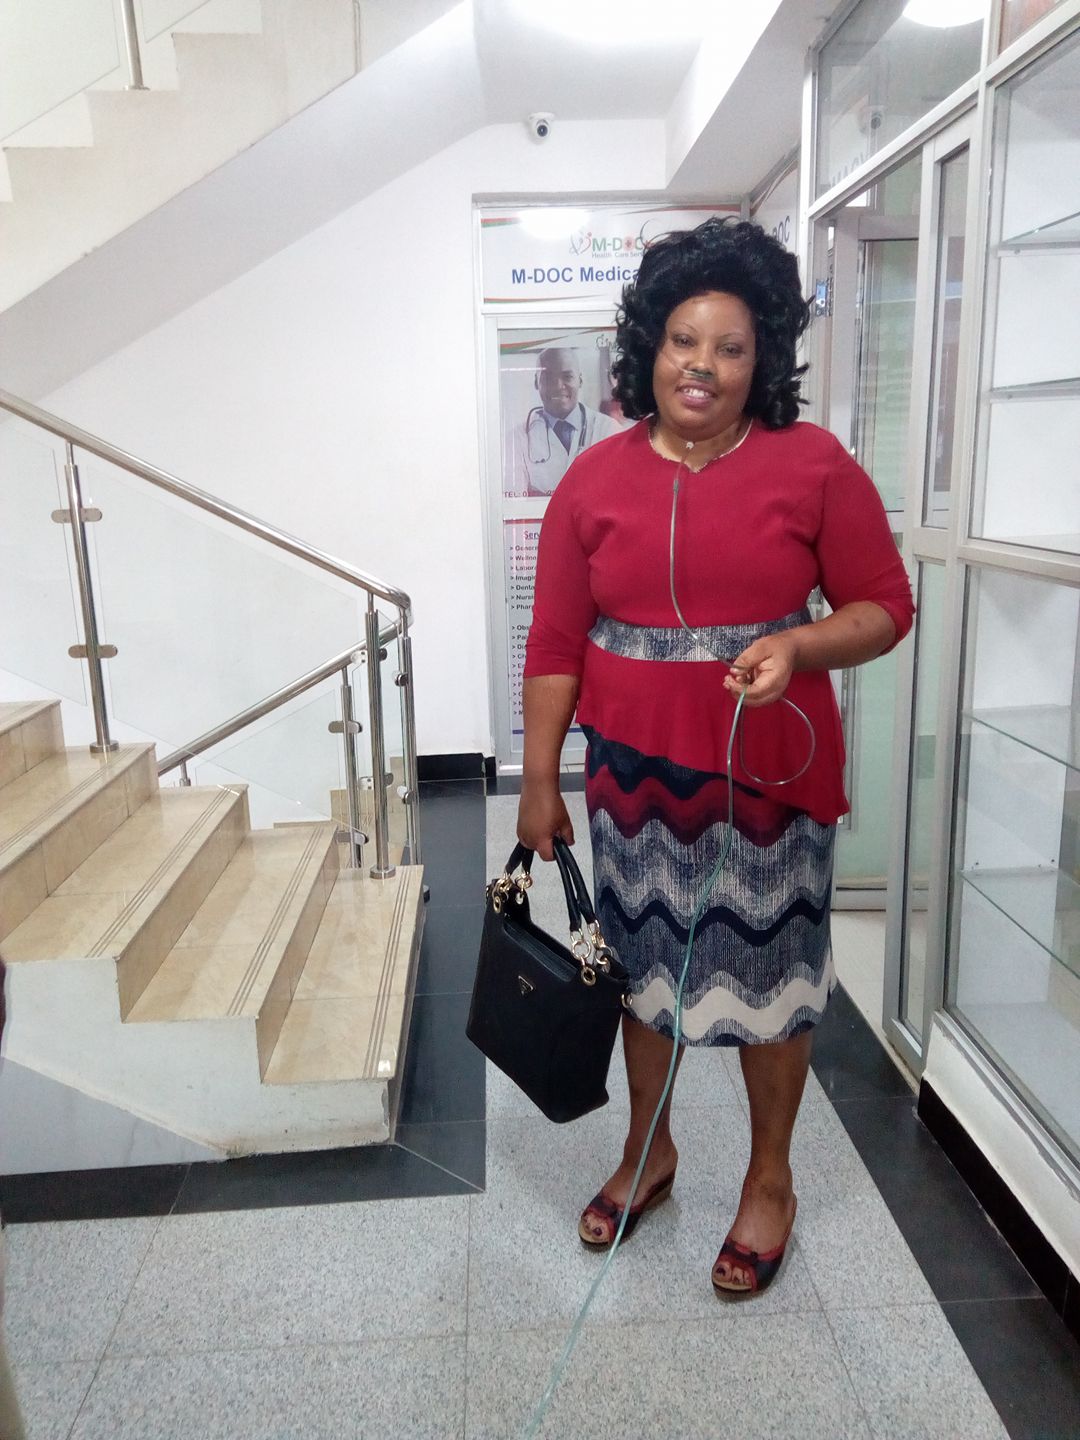 Gladys, who is dressed nicely in a top and skirt with a large purse in one hand, smiles while standing in a nice building. She is wearing an oxygen tank.